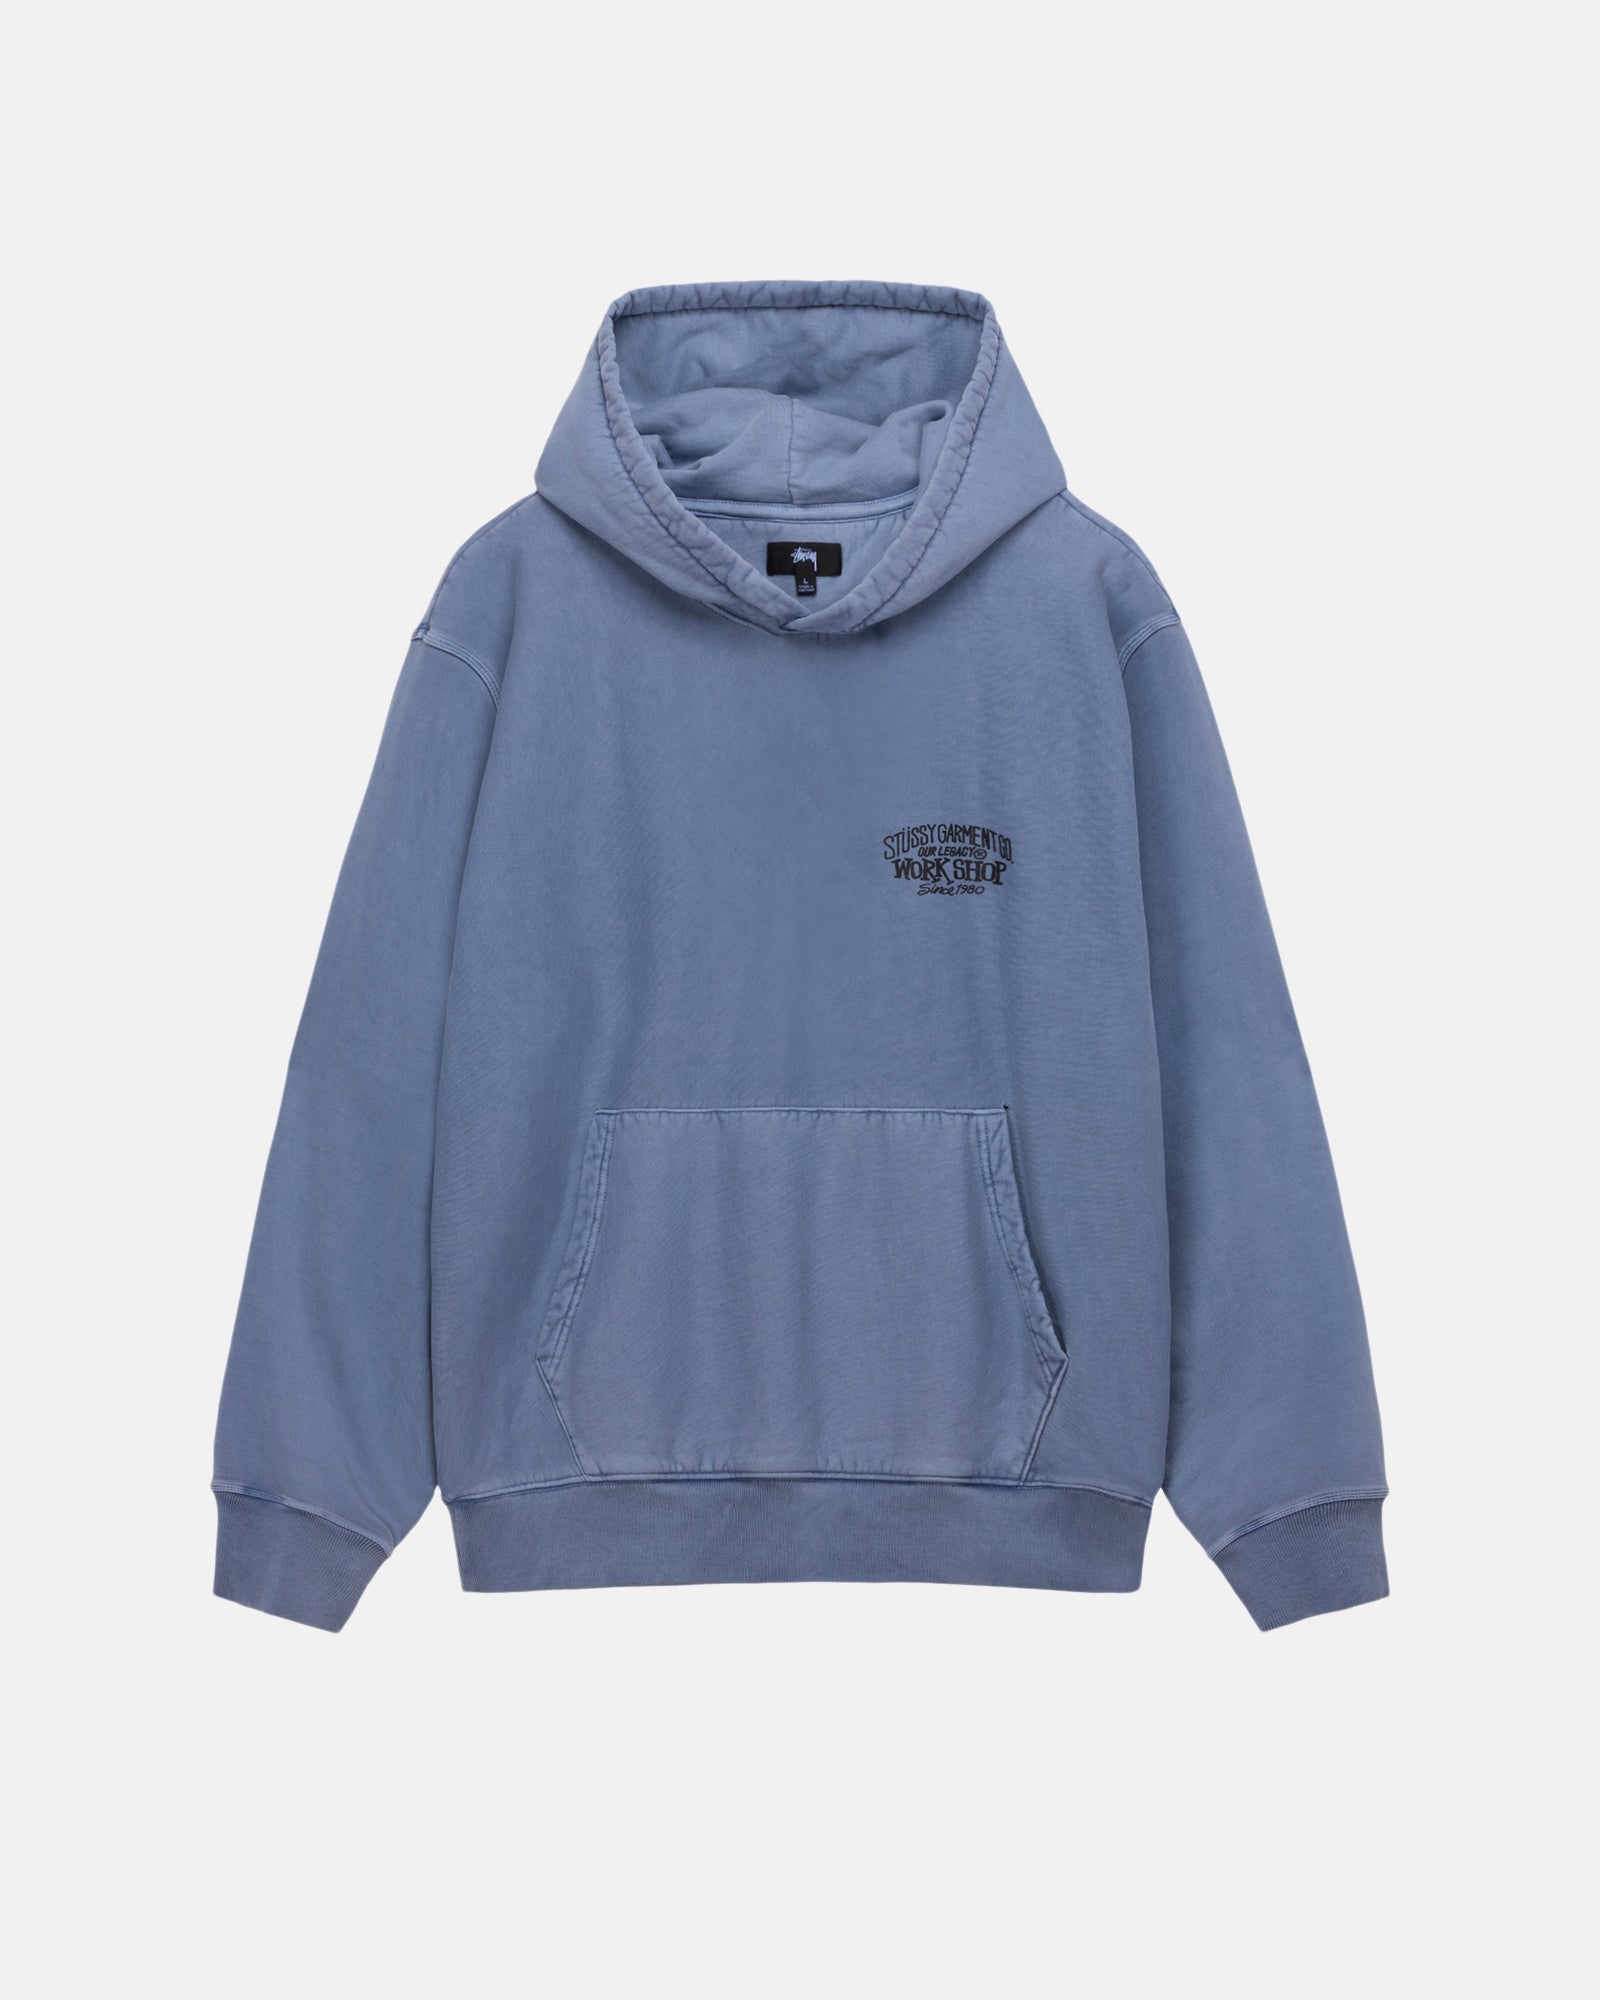 Our Legacy Work Shop Surfman Pigment Dyed Hoodie Deals | www ...